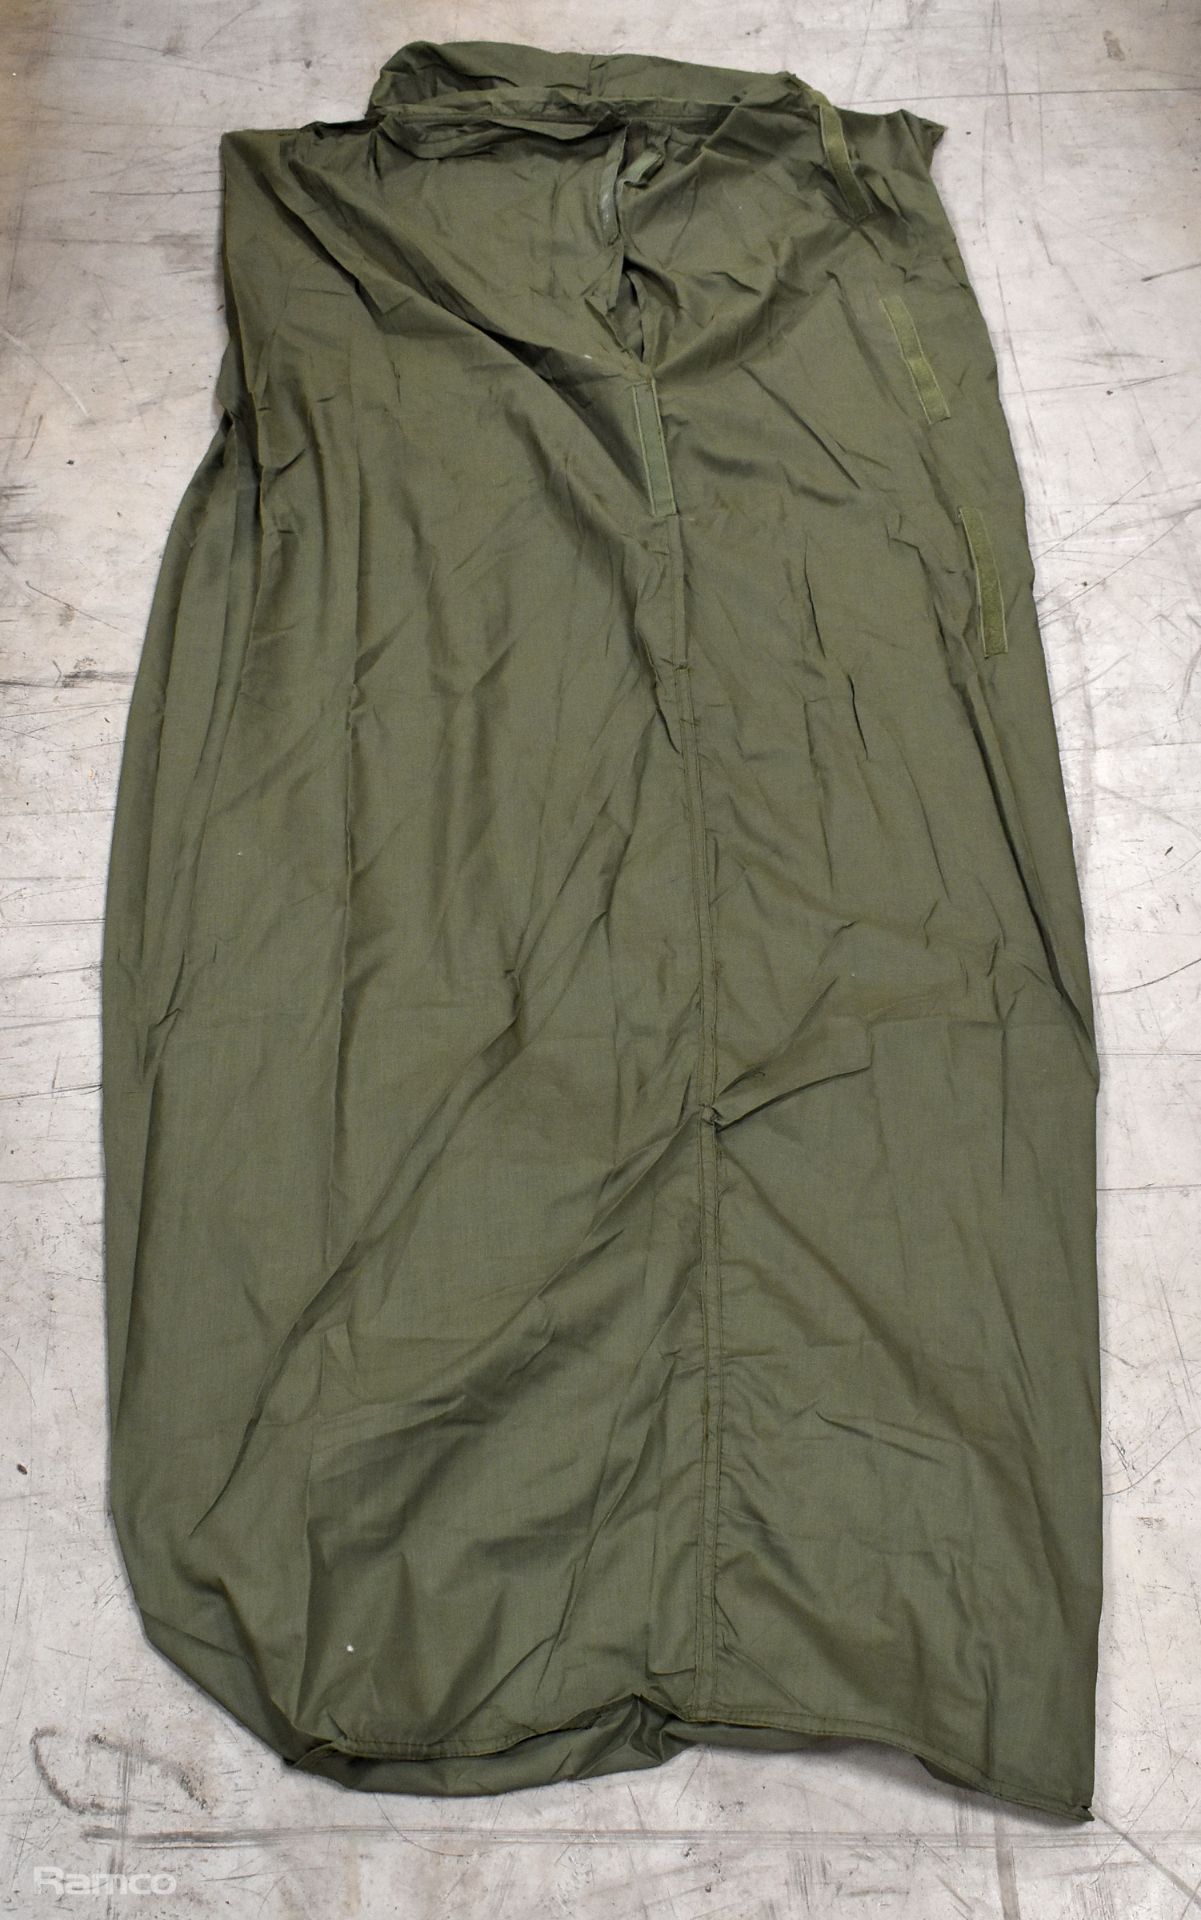 36x British Army sleeping bag light weight liners - large - Olive - mixed grades